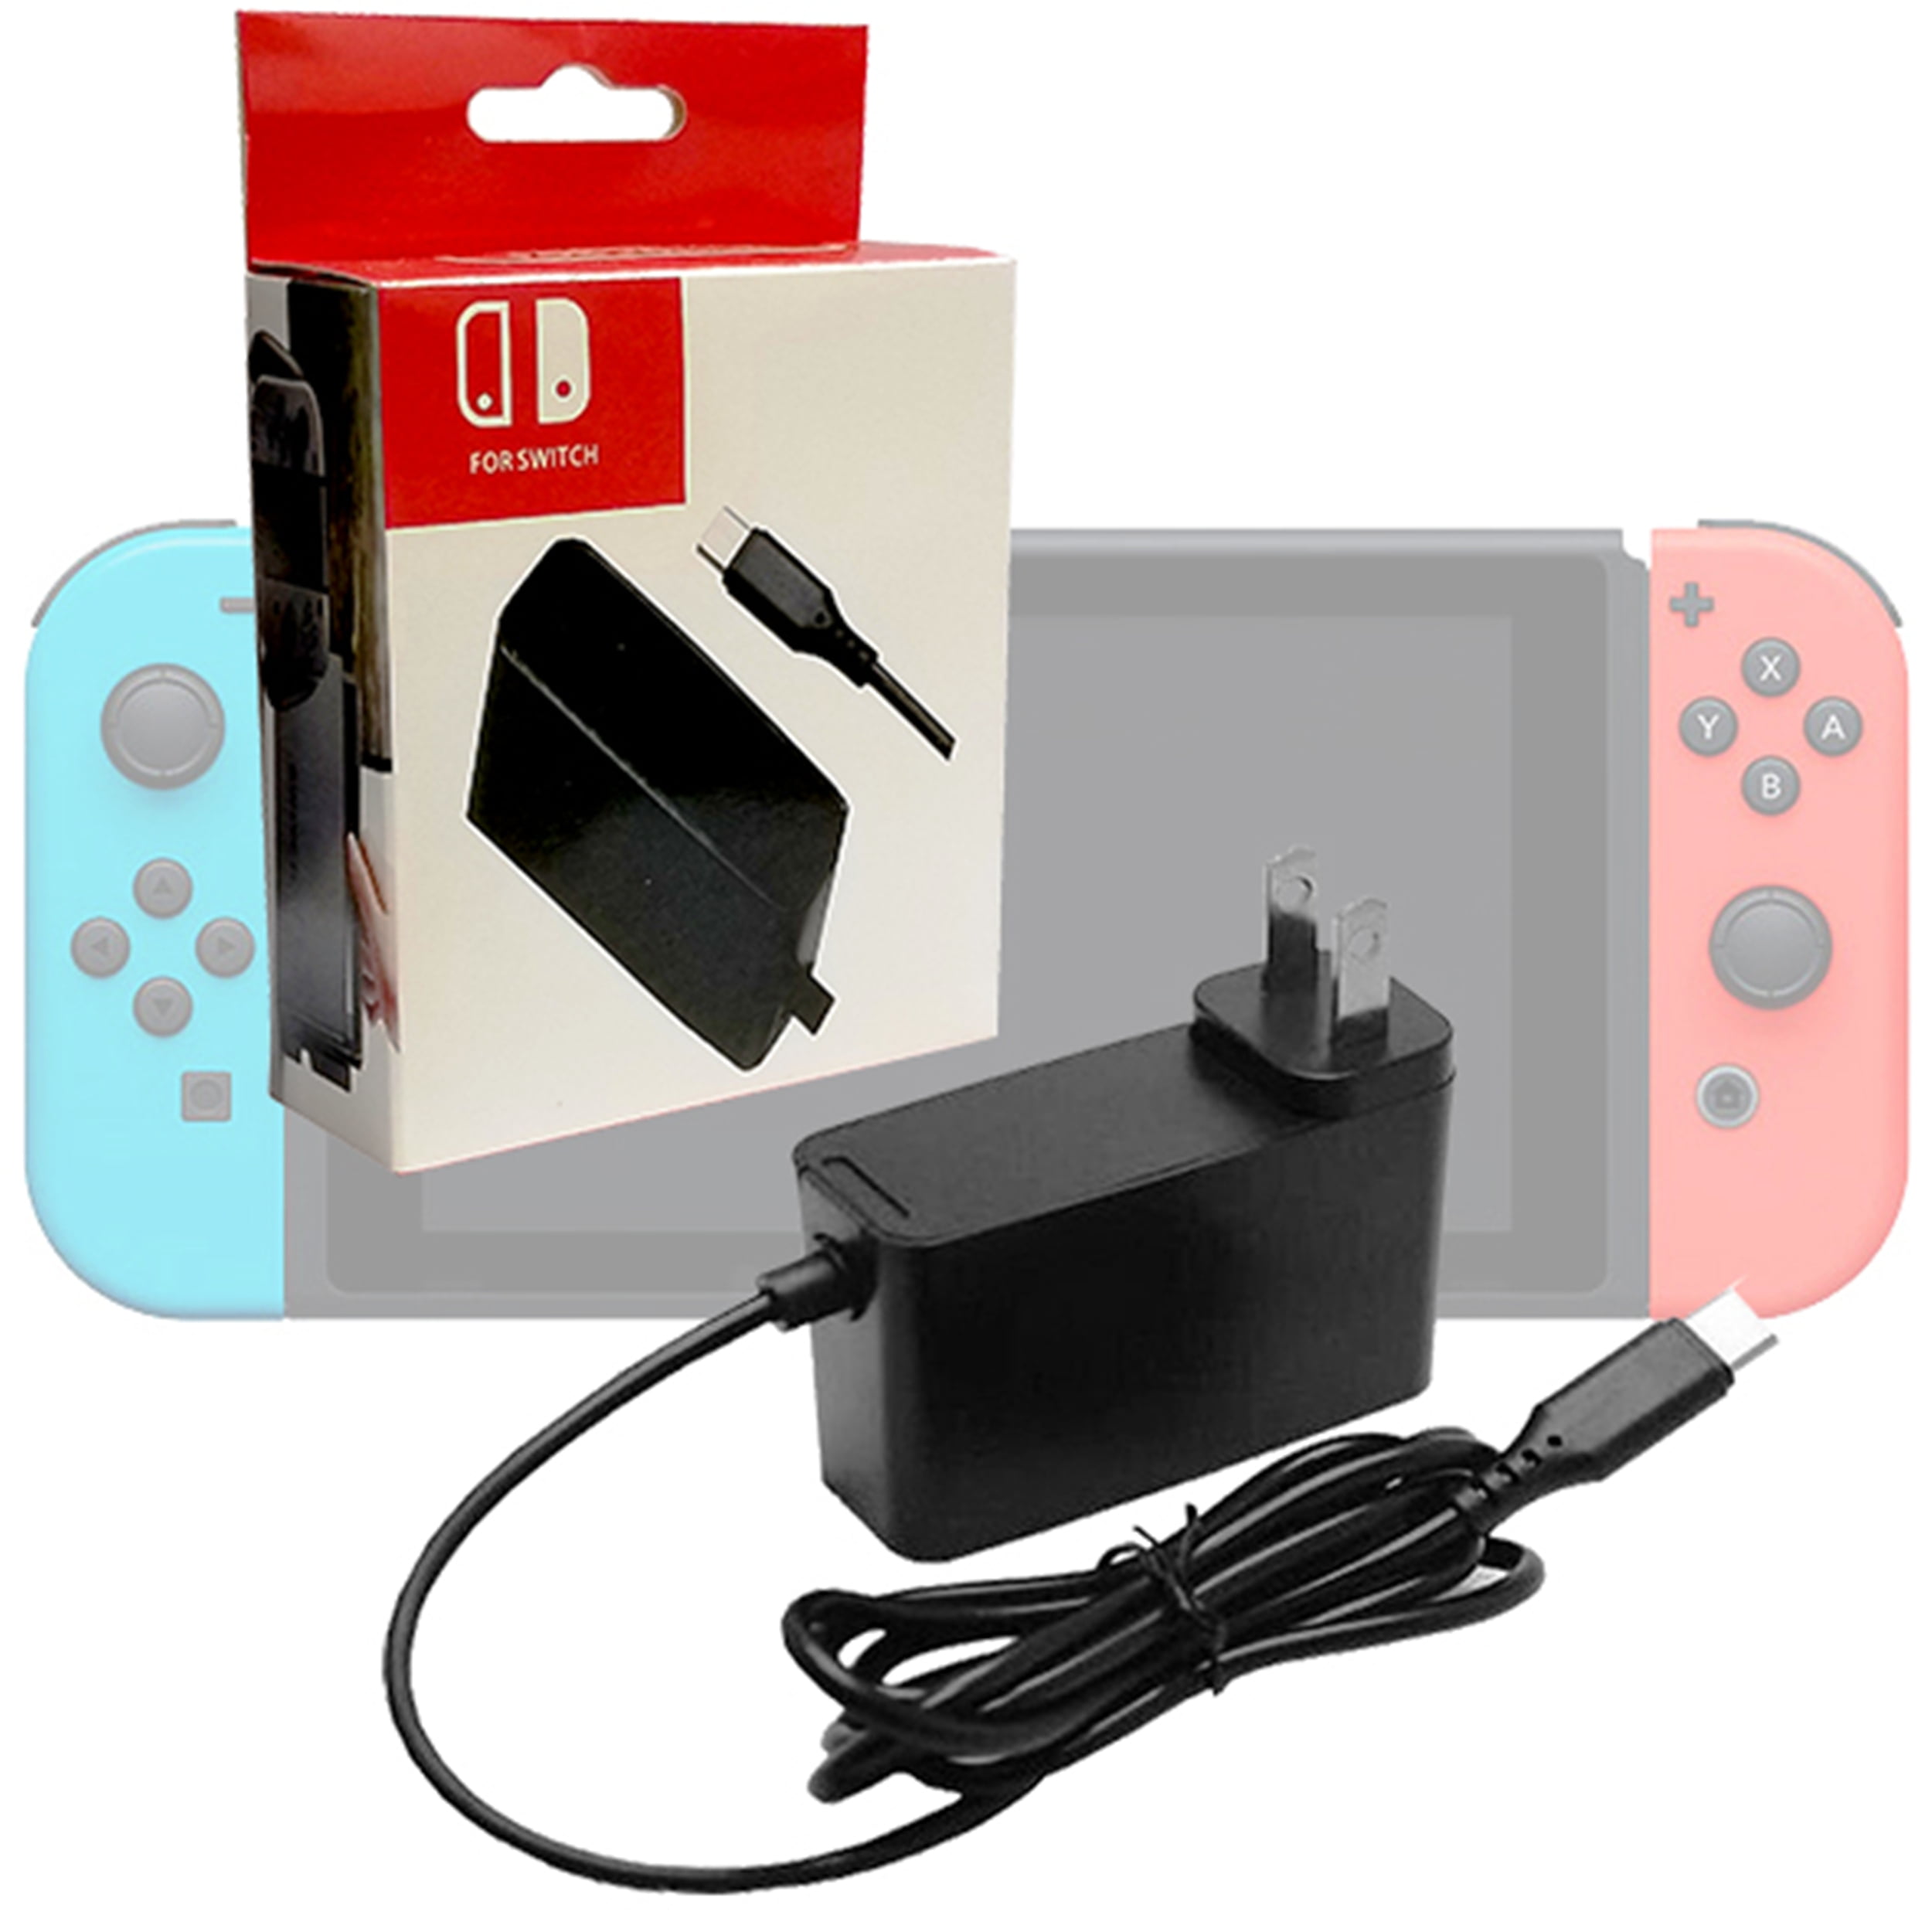 what charger comes with nintendo switch